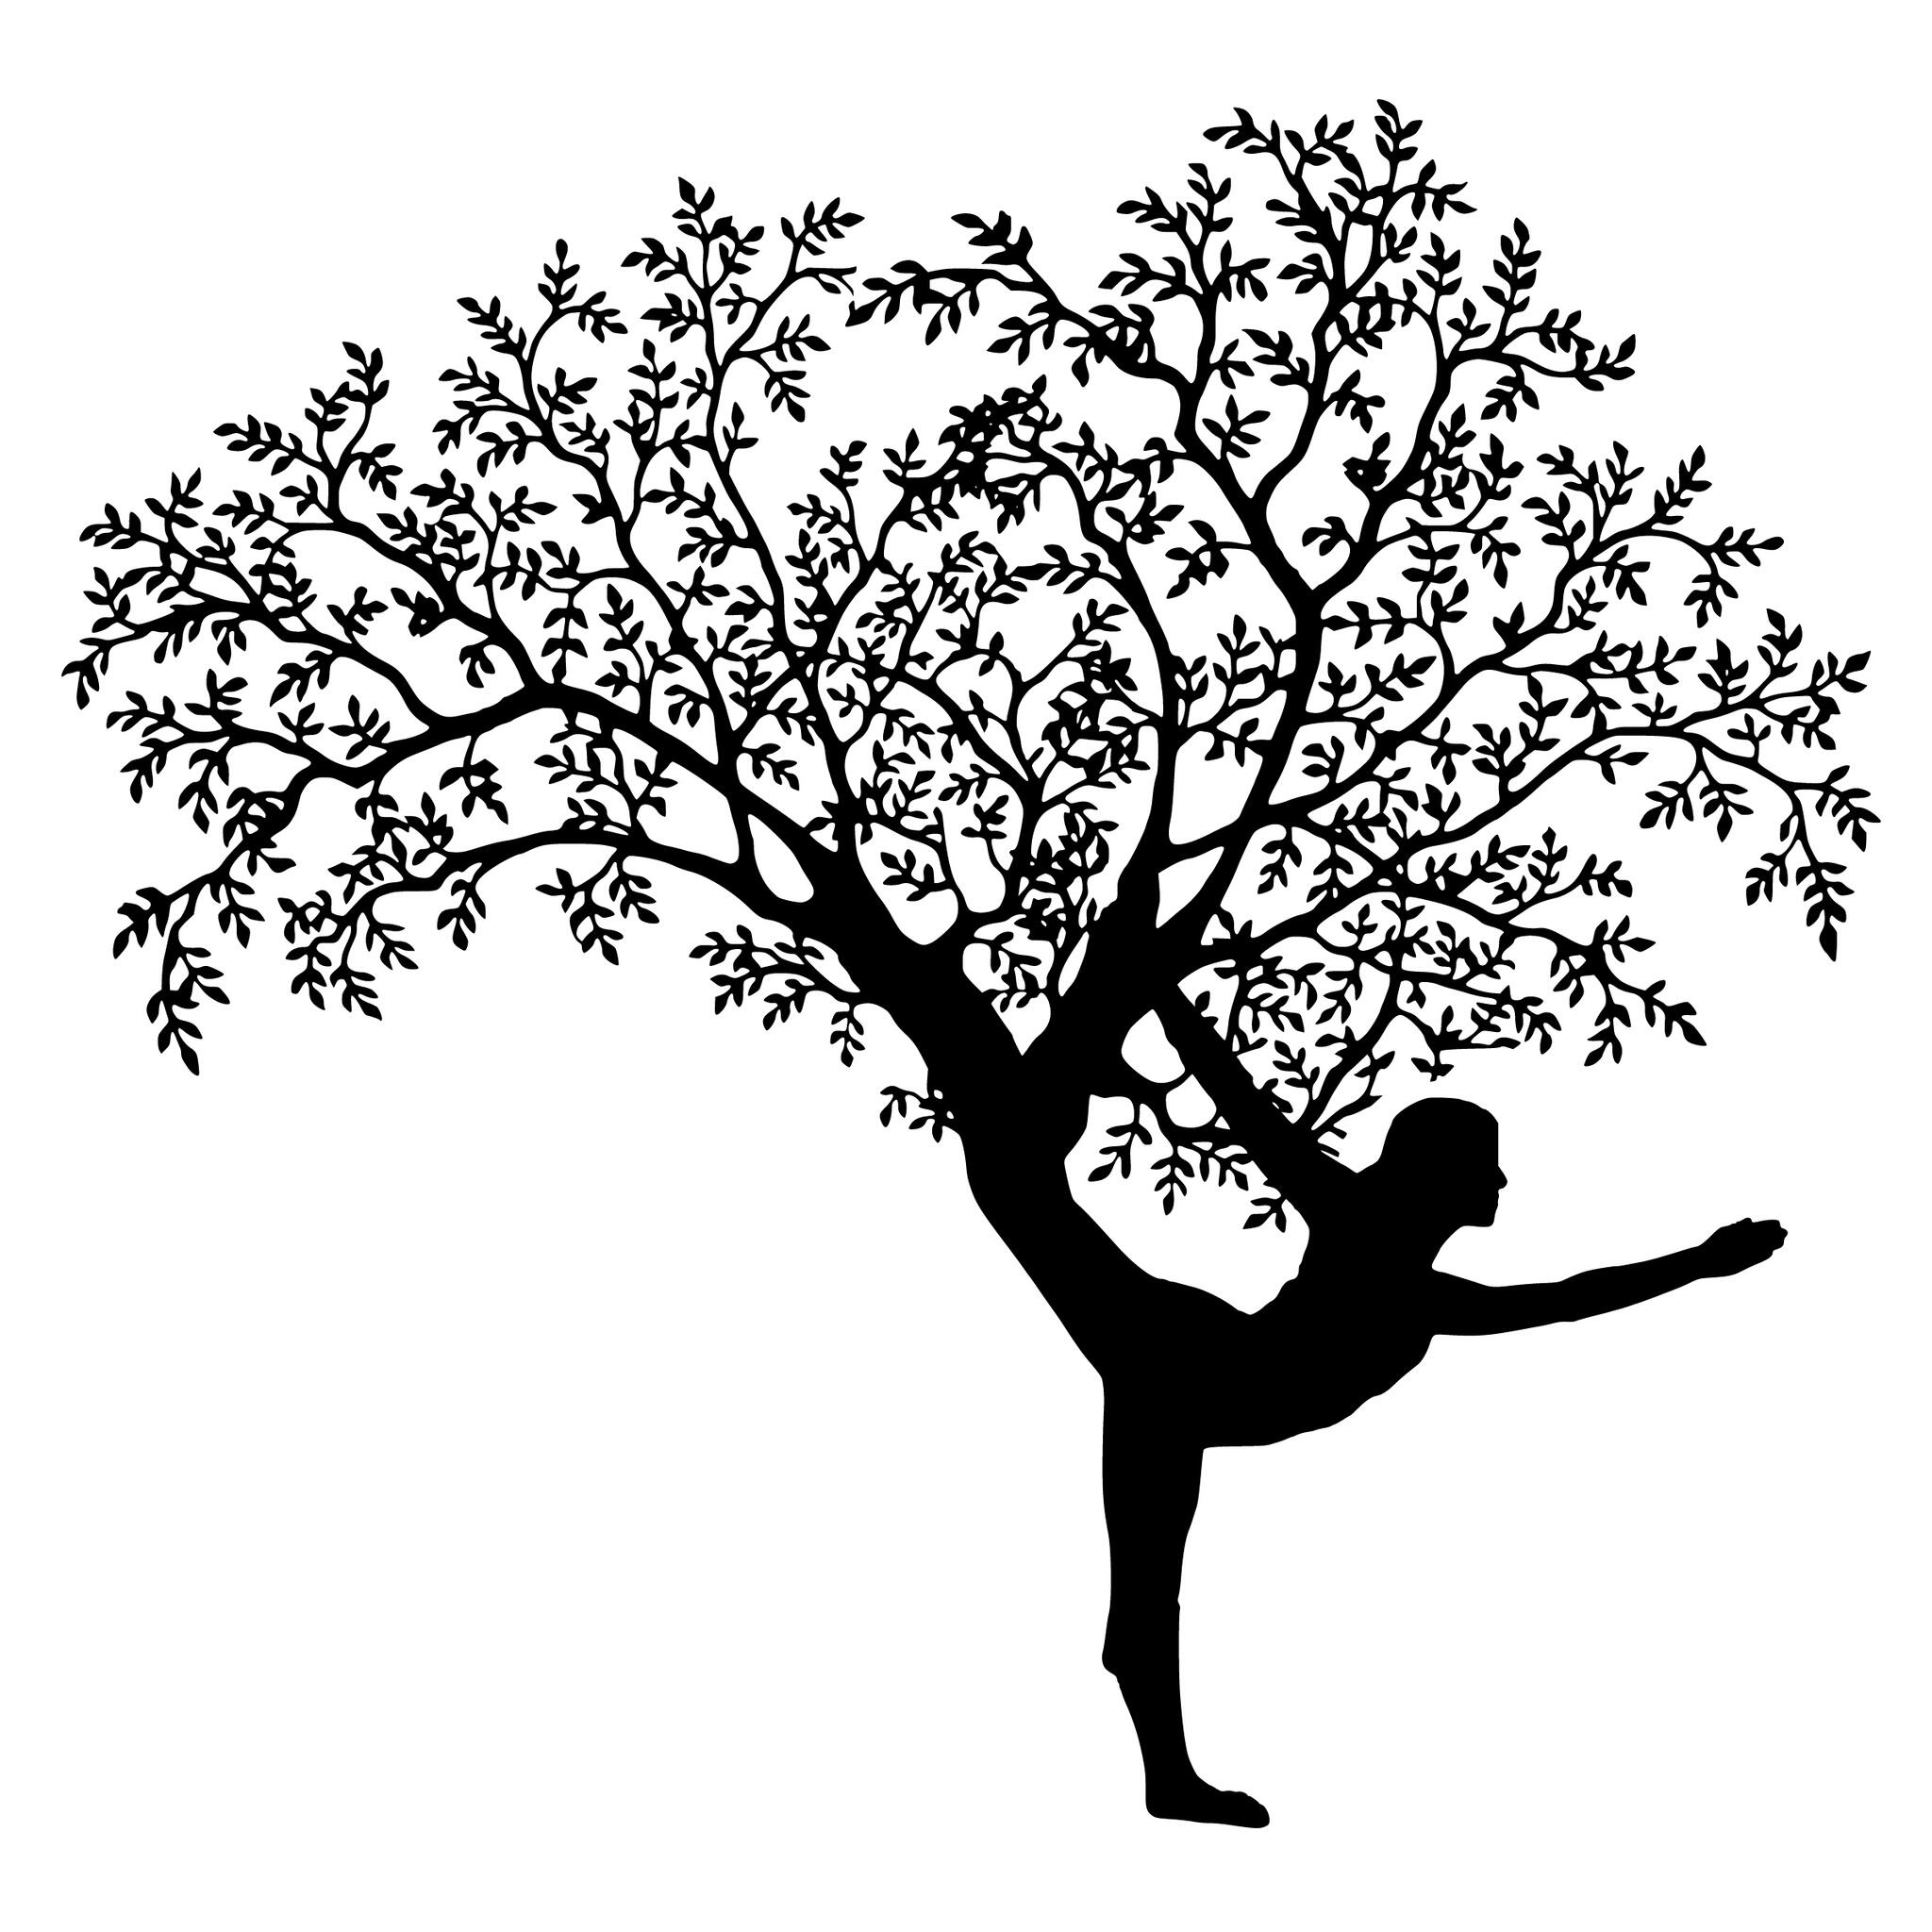 Yoga Tree SVG, Yoga Pose SVG, Tree of Life SVG, Yoga Tree Clipart, Yoga Tree  Files for Cricut, Cut Files for Silhouette, Dxf,png,eps,vector - Etsy